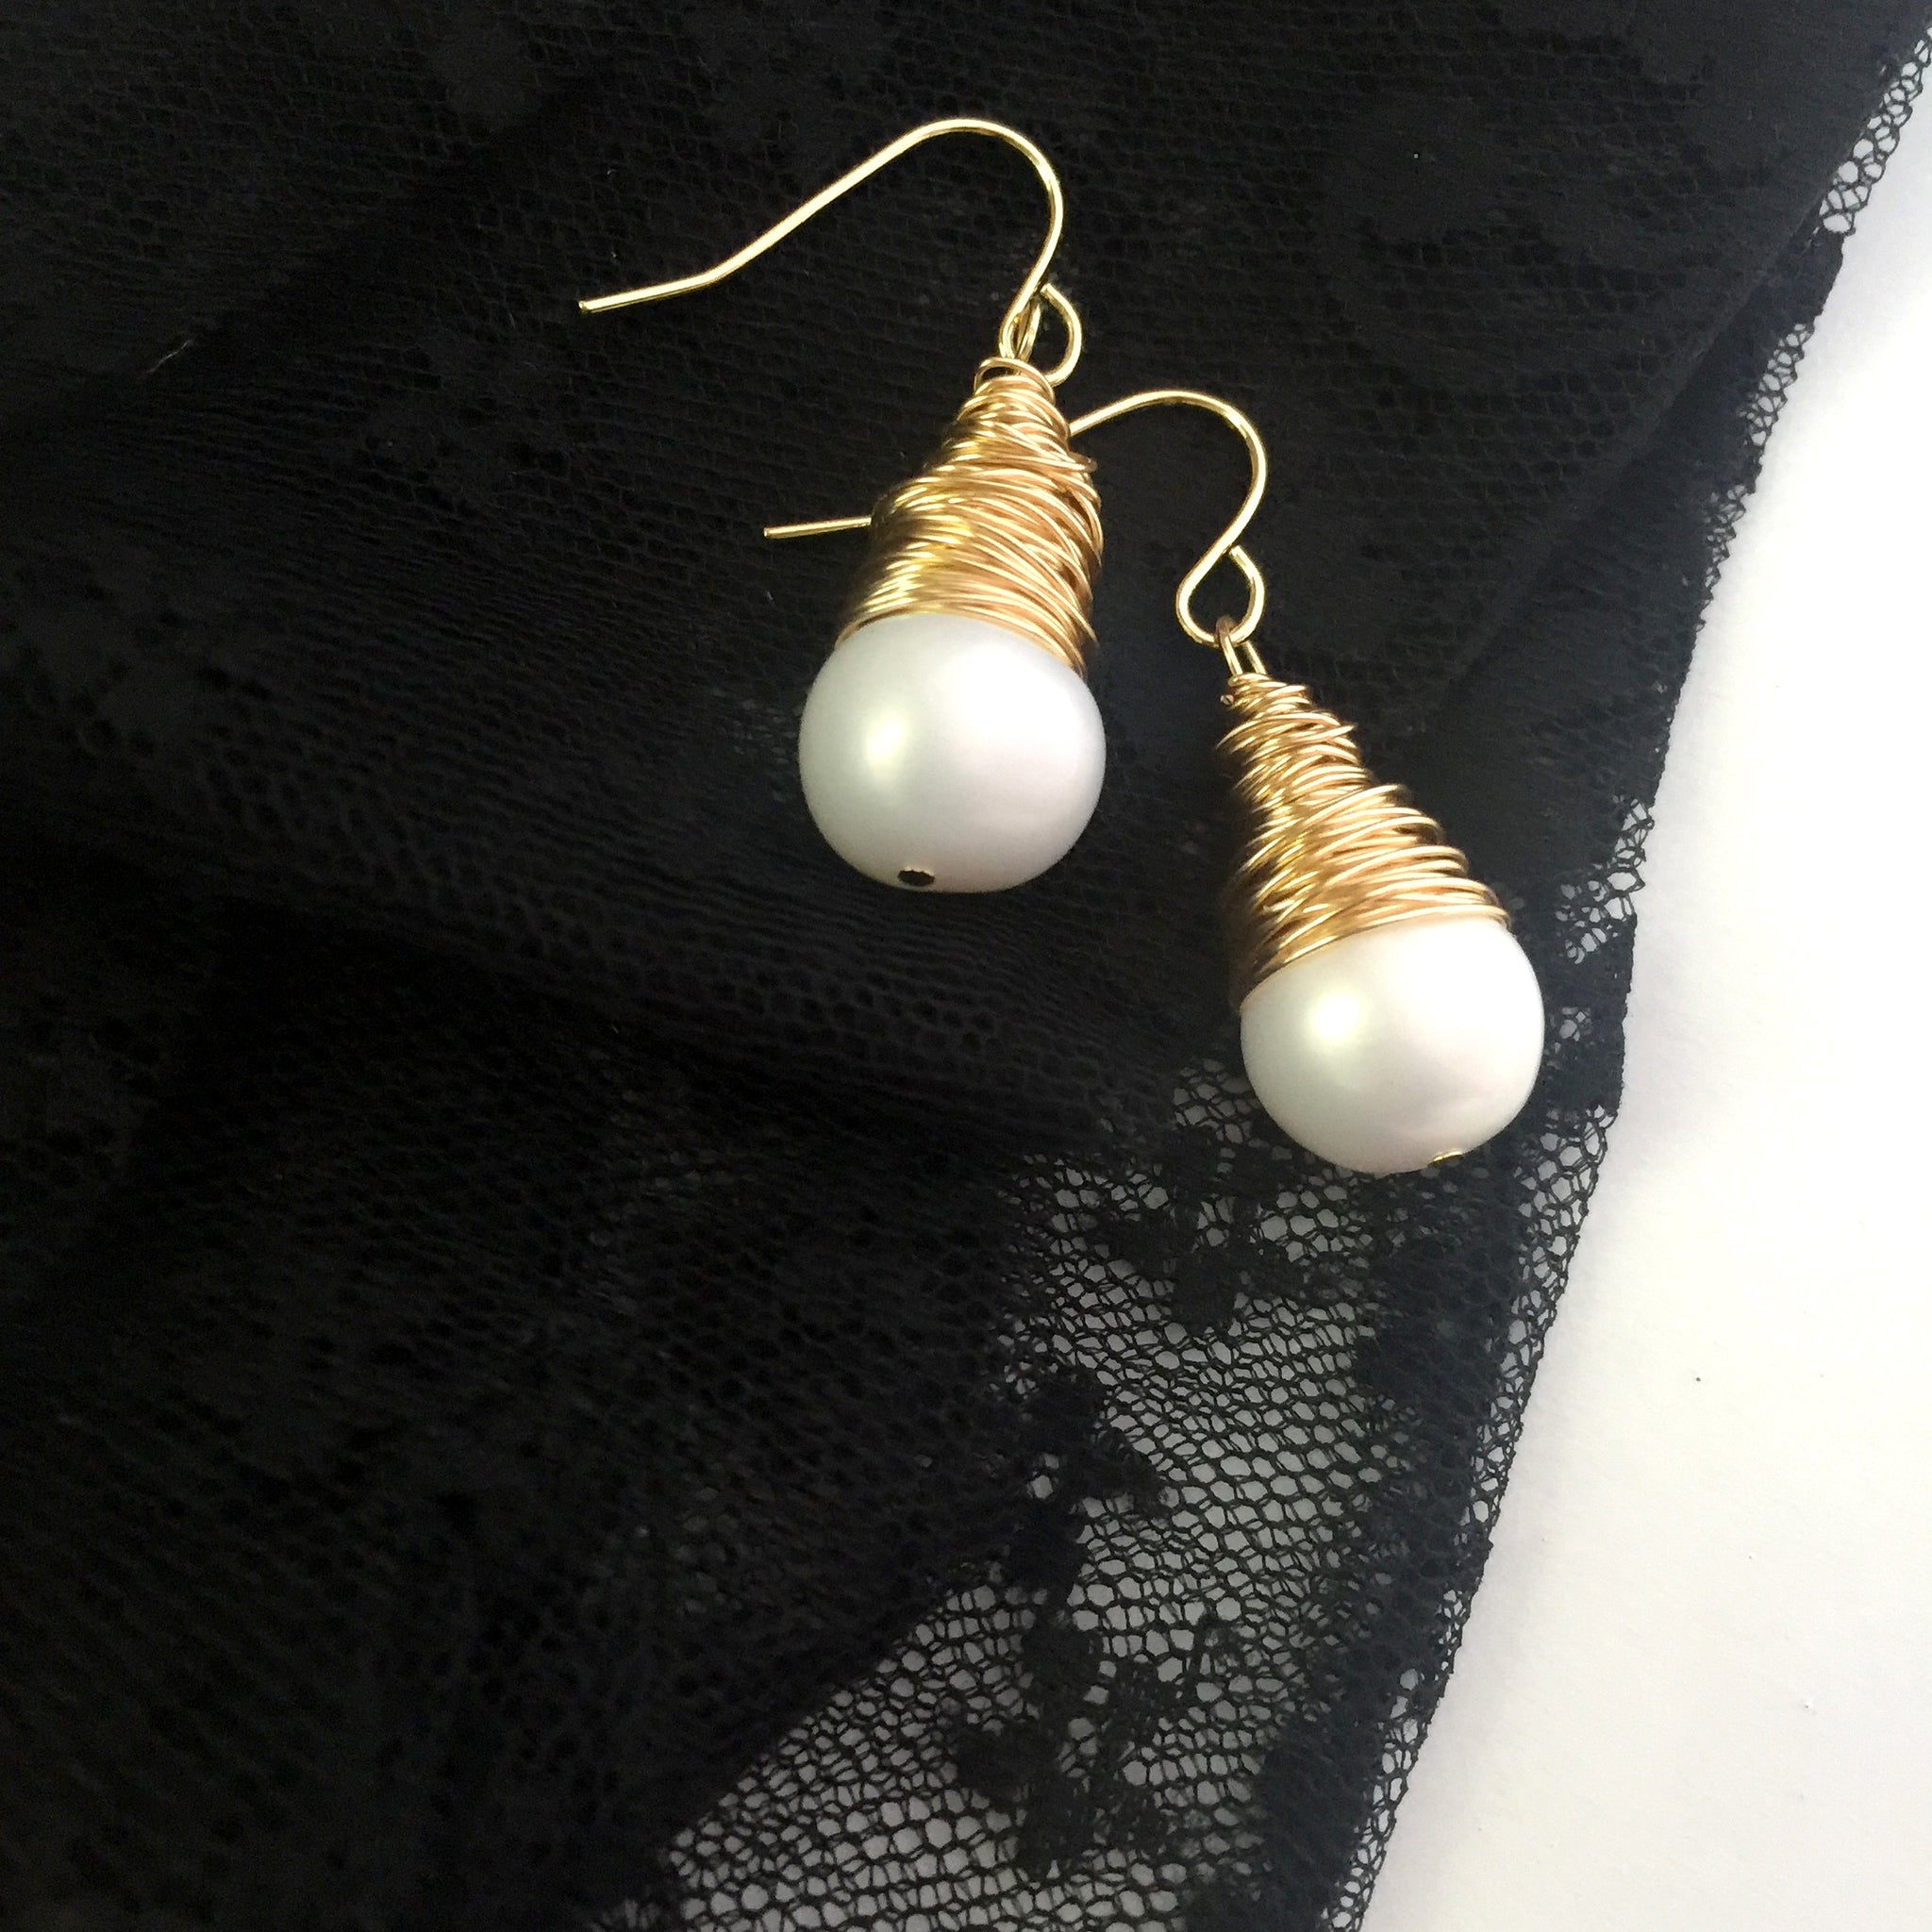 Boho Gypsy Pearl Dangle Earrings, Gifts for Mom, 14k Gold and Baroque Pearl Jewelry